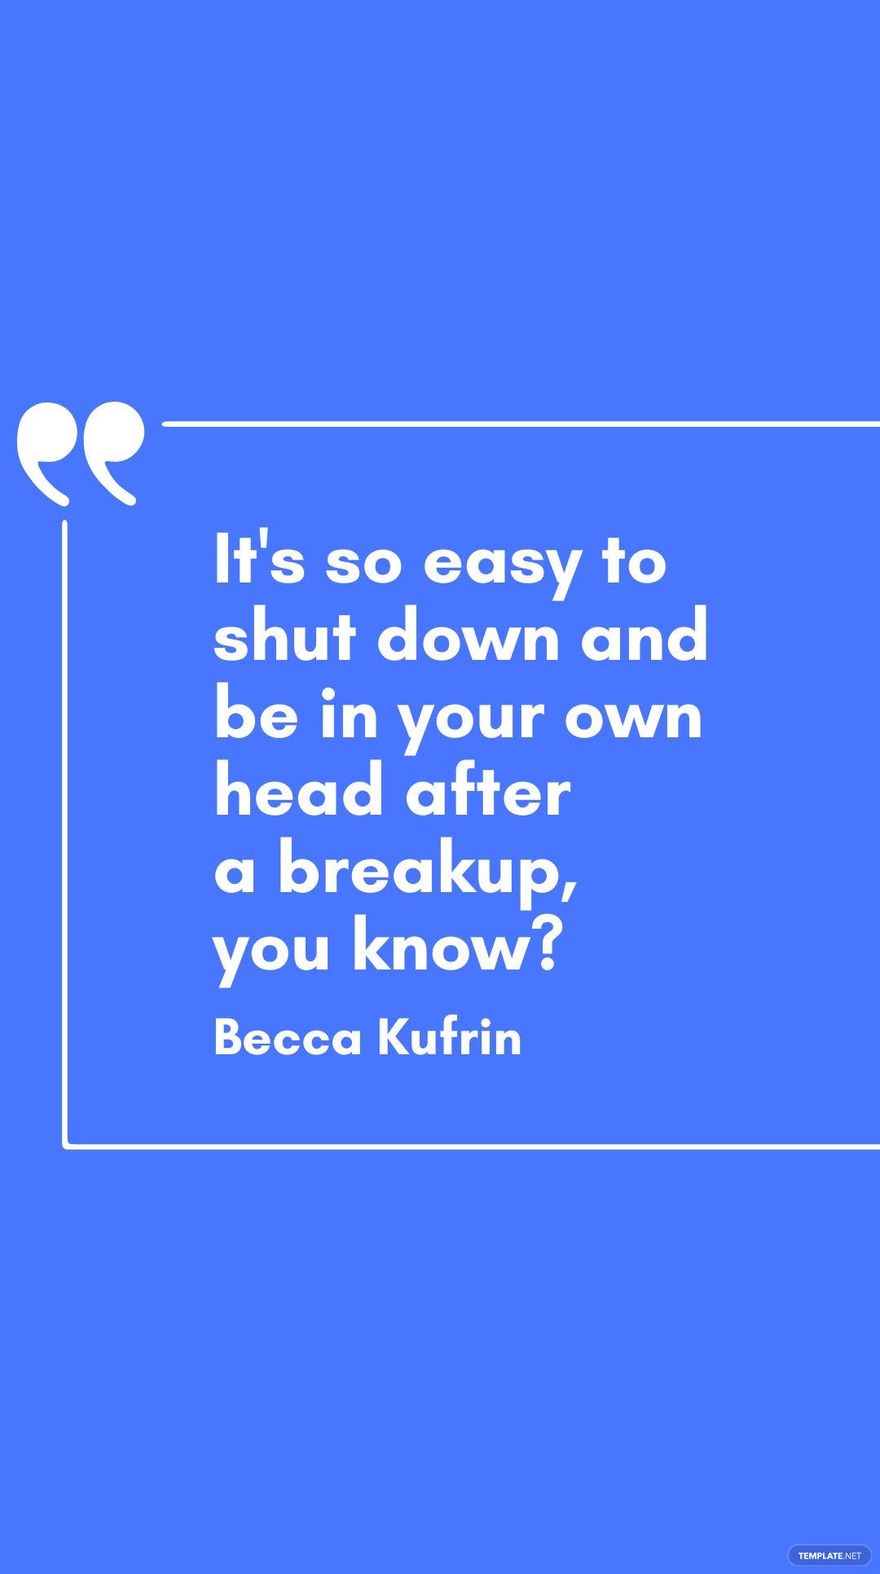 Free Becca Kufrin - It's so easy to shut down and be in your own head after a breakup, you know? in JPG